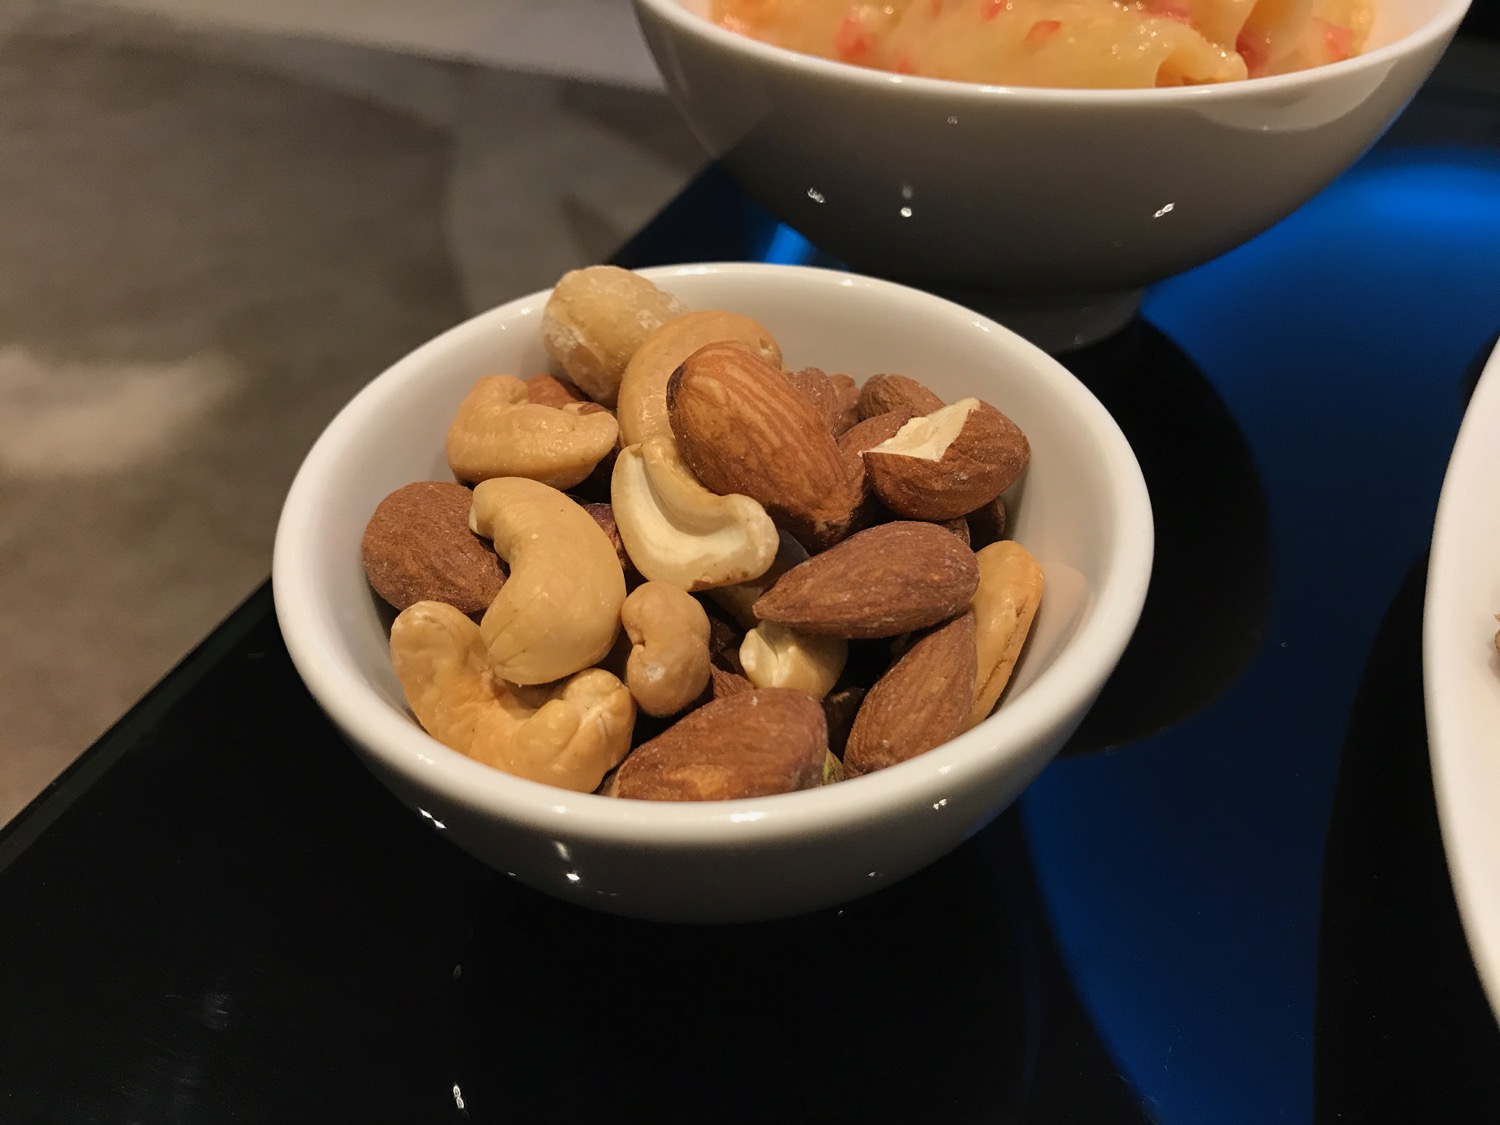 a bowl of nuts and a bowl of pasta